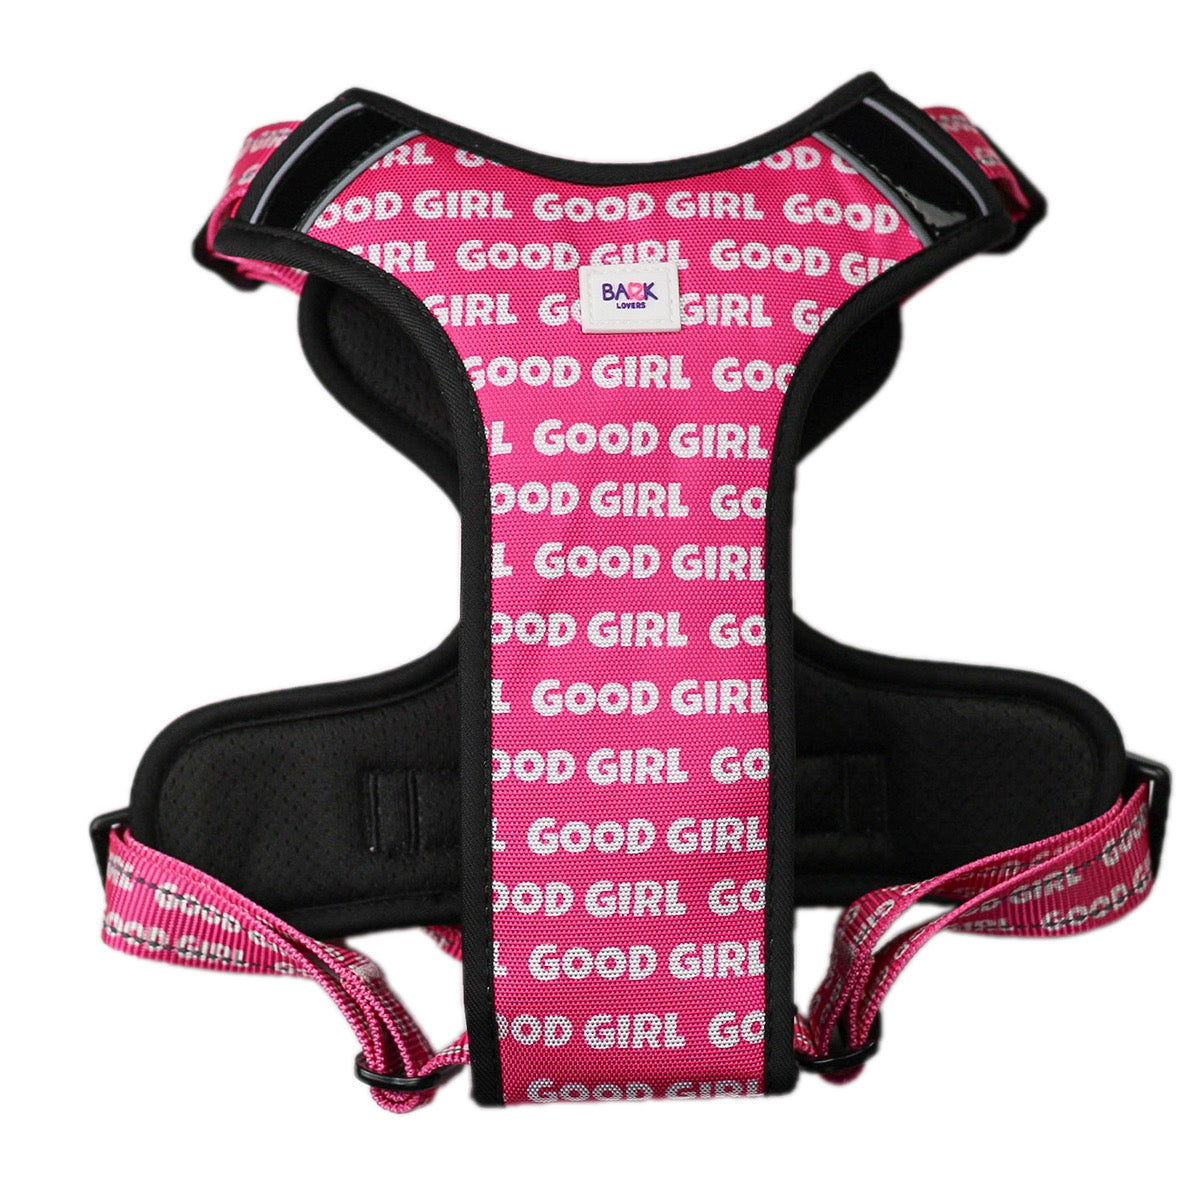 Durable Good Girl Dog Harness - Ensure reliable control during outdoor adventures.